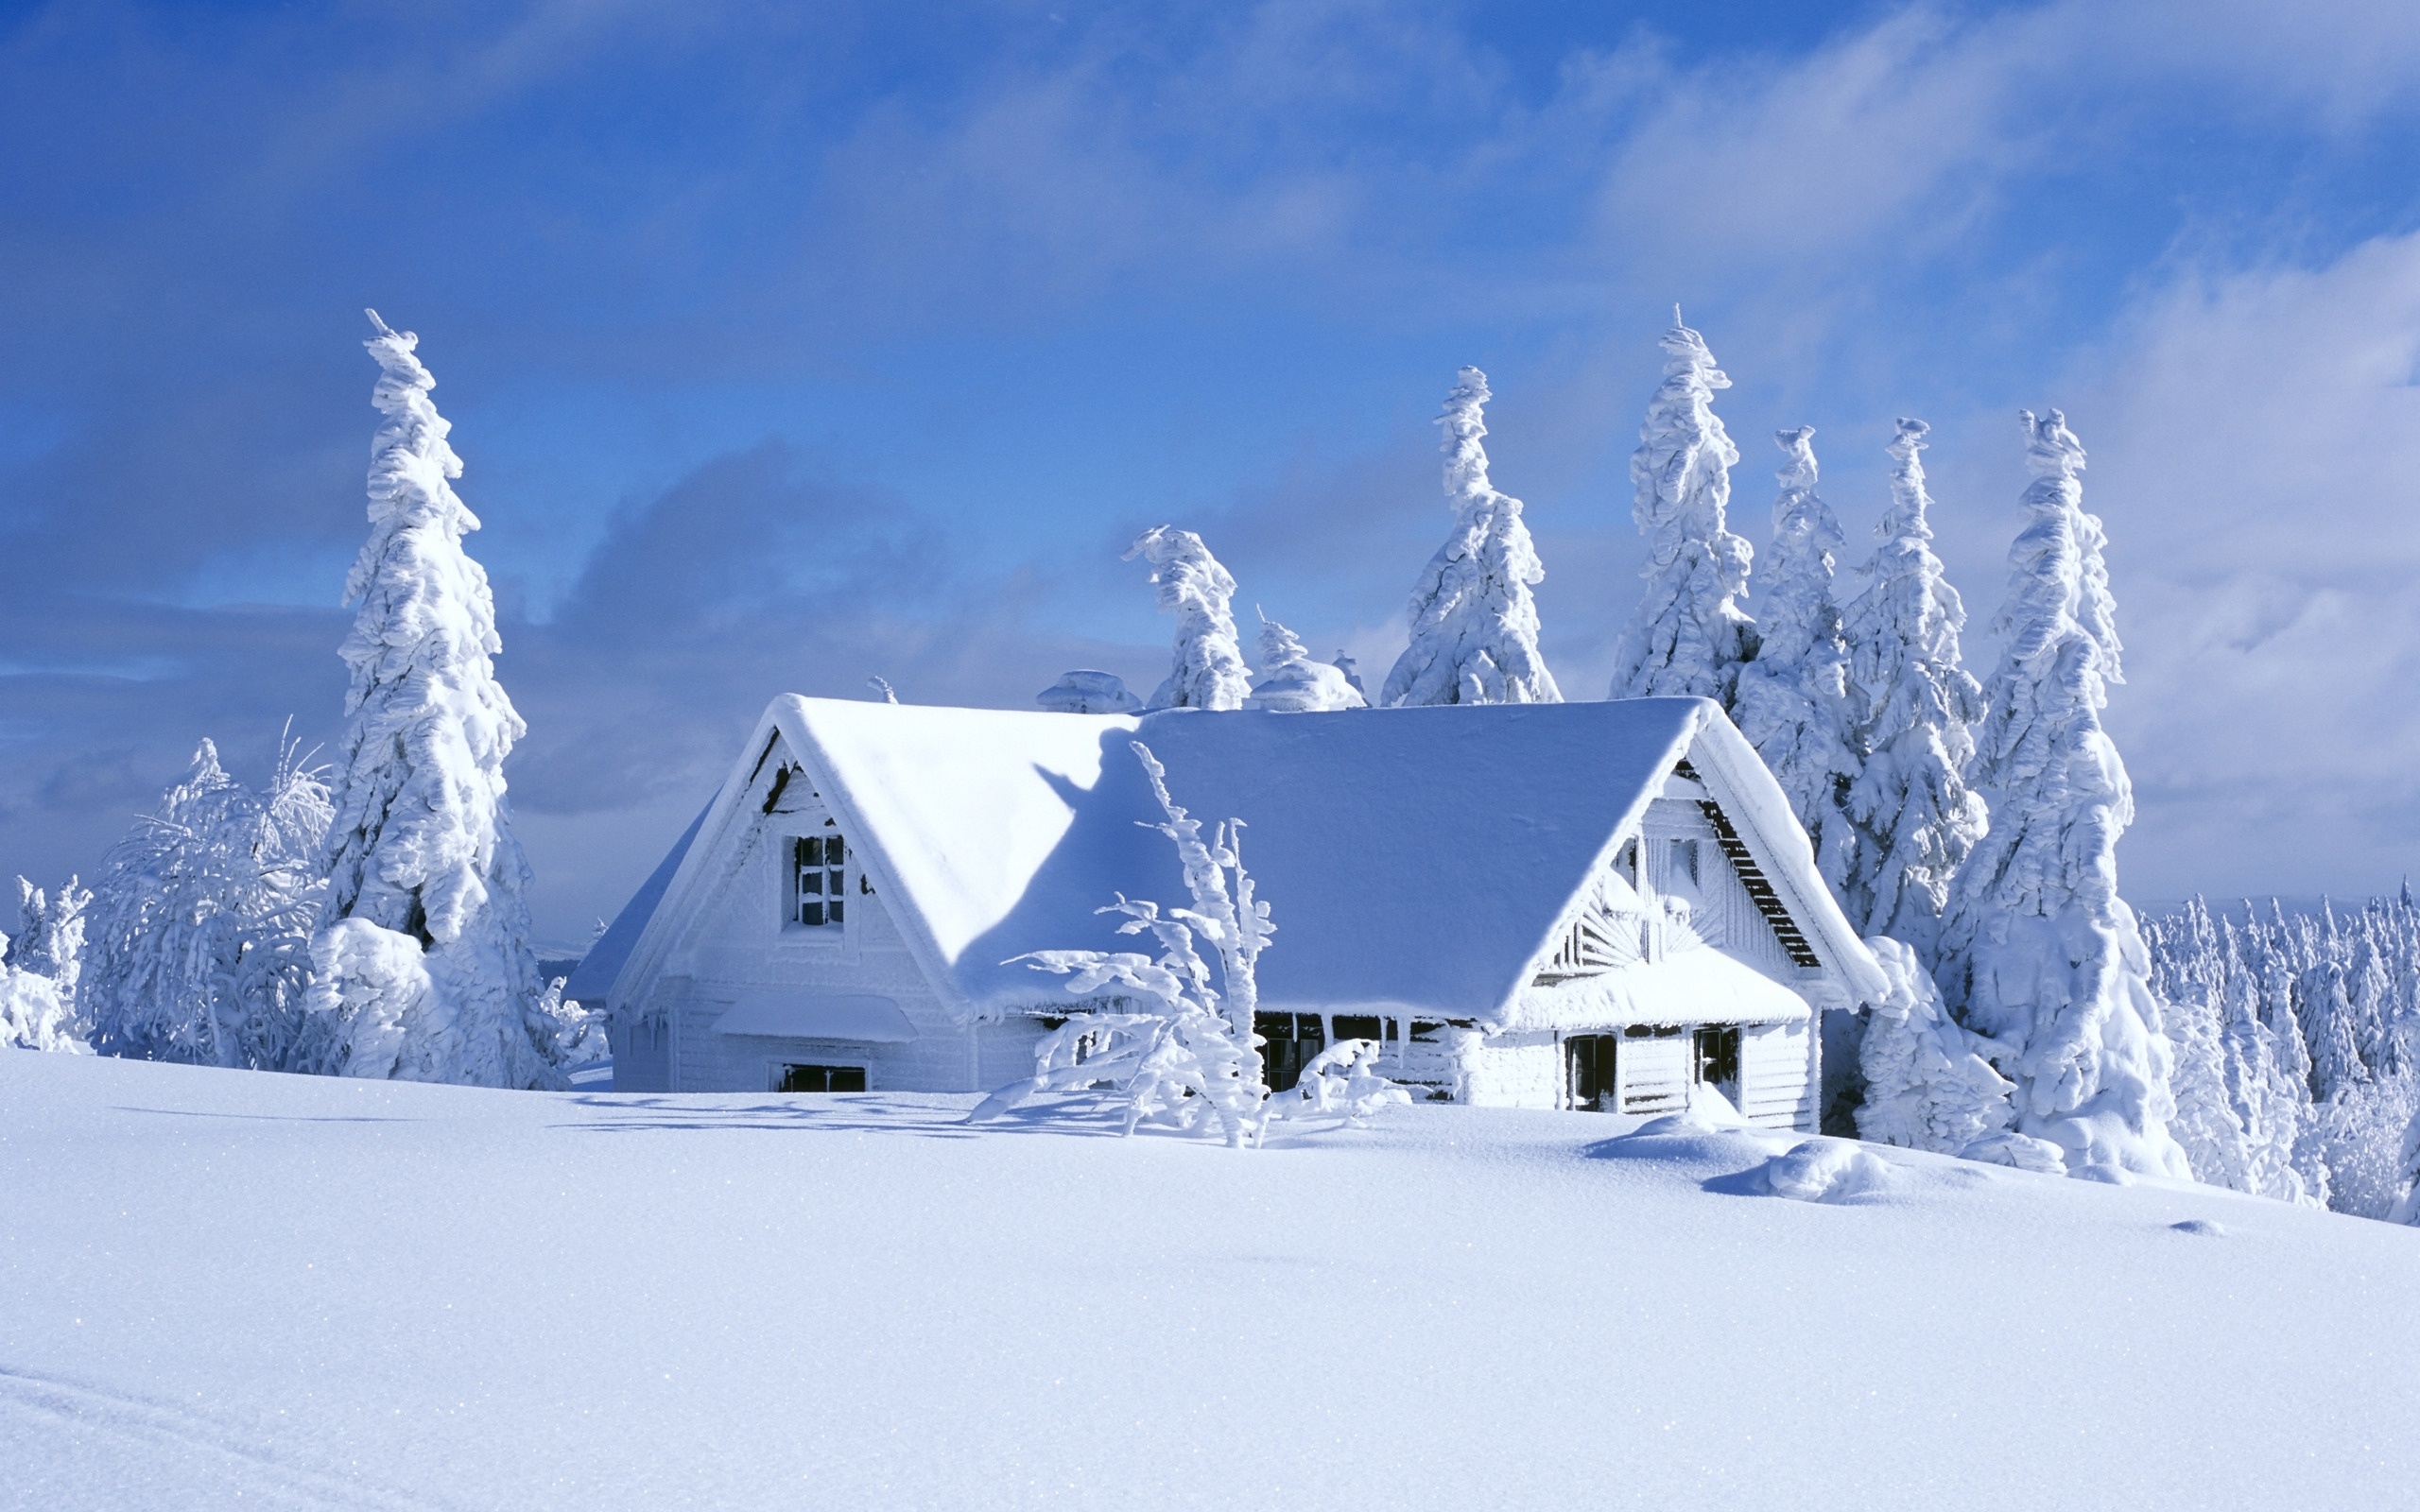 House Covered In Snow wallpaper High Quality WallpapersWallpaper 2560x1600